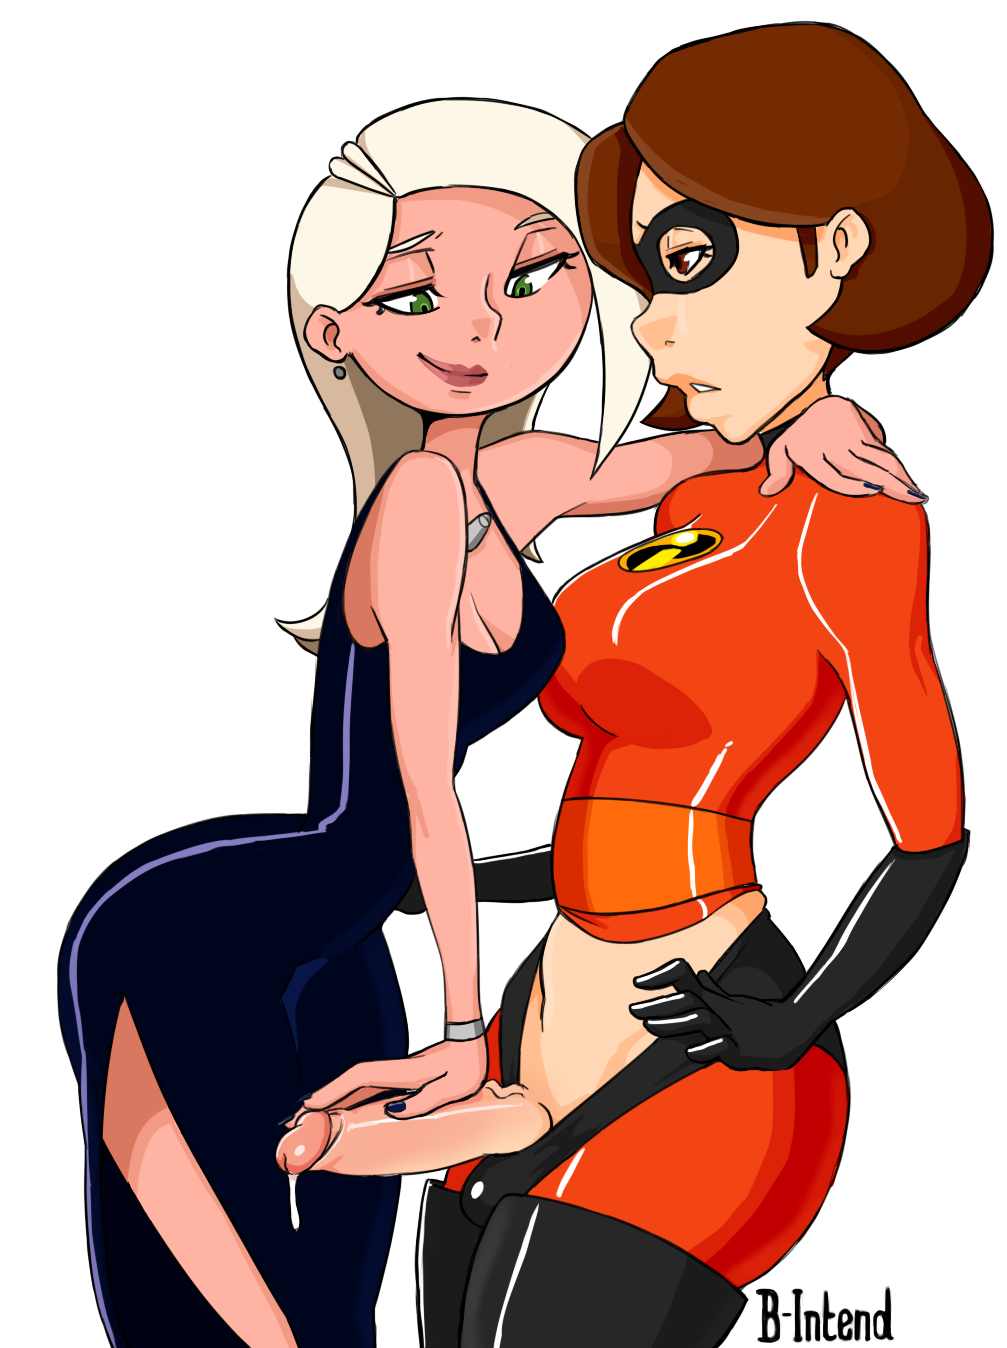 The incredibles xxx spanking - Adult gallery.